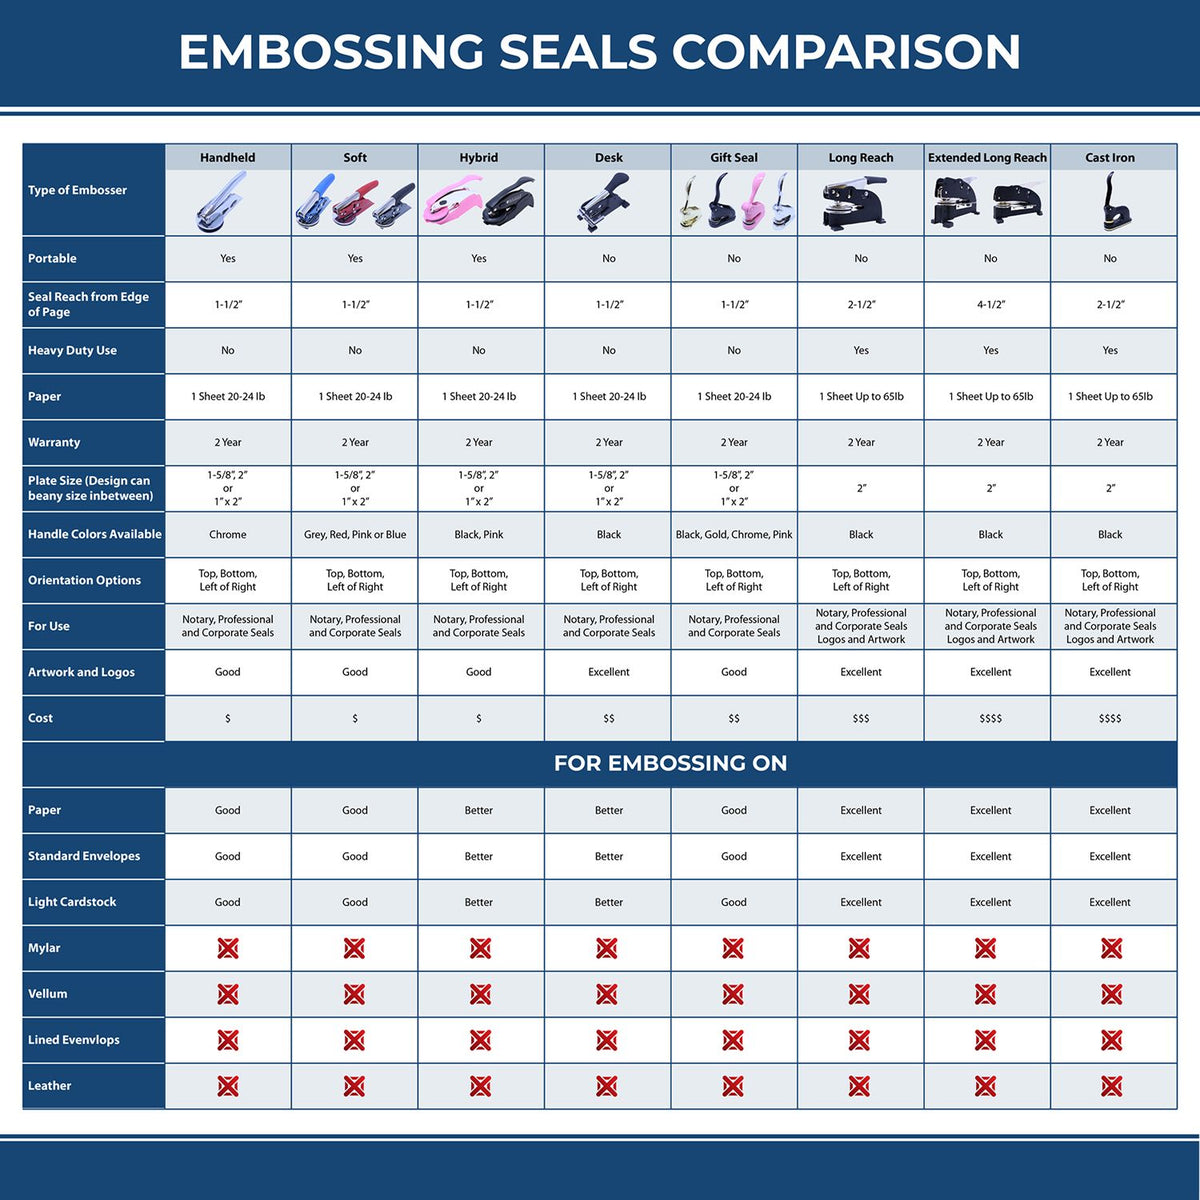 A comparison chart for the different types of mount models available for the Handheld Indiana Architect Seal Embosser.